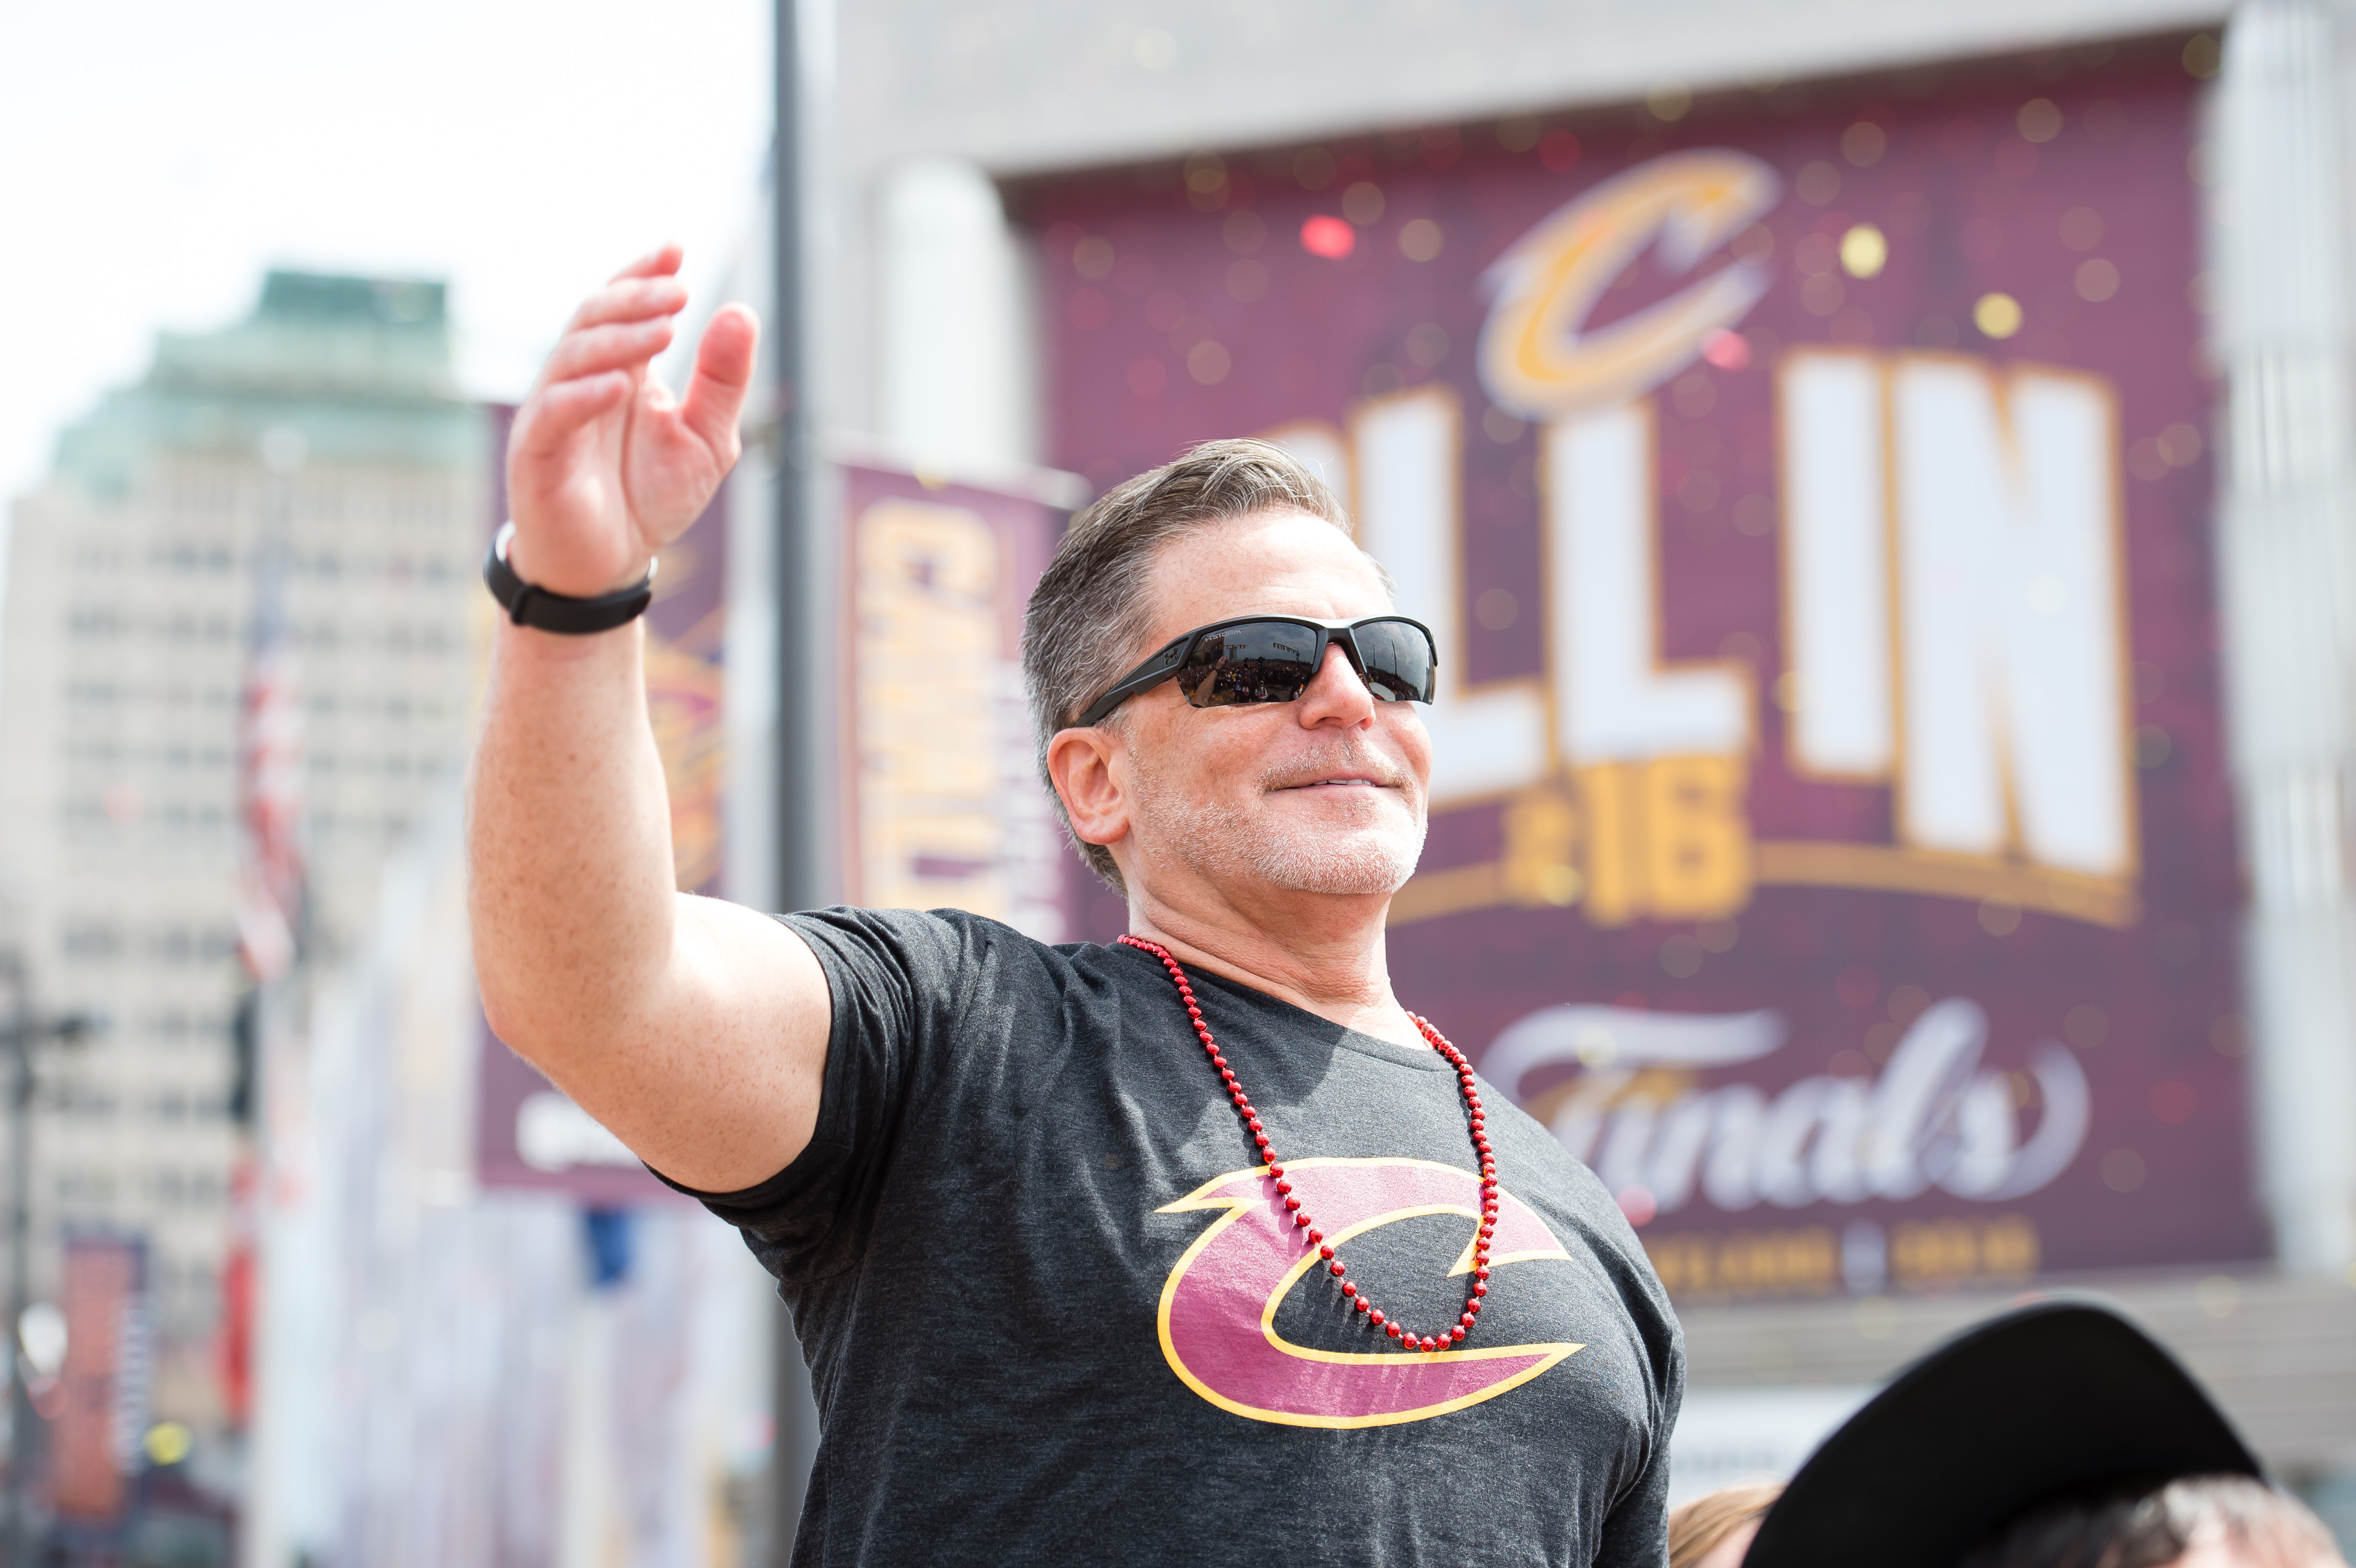 CLEVELAND, OH - JUNE 22: Majority owner of the Cleveland Cavaliers Dan Gilbert waves to the fans during the Cleveland Cavaliers 2016 championship victory parade and rally on June 22, 2016 in Cleveland, Ohio. NOTE TO USER: User expressly acknowledges and agrees that, by downloading and/or using this photograph, user is consenting to the terms and conditions of the Getty Images License Agreement.   Jason Miller/Getty Images/AFP